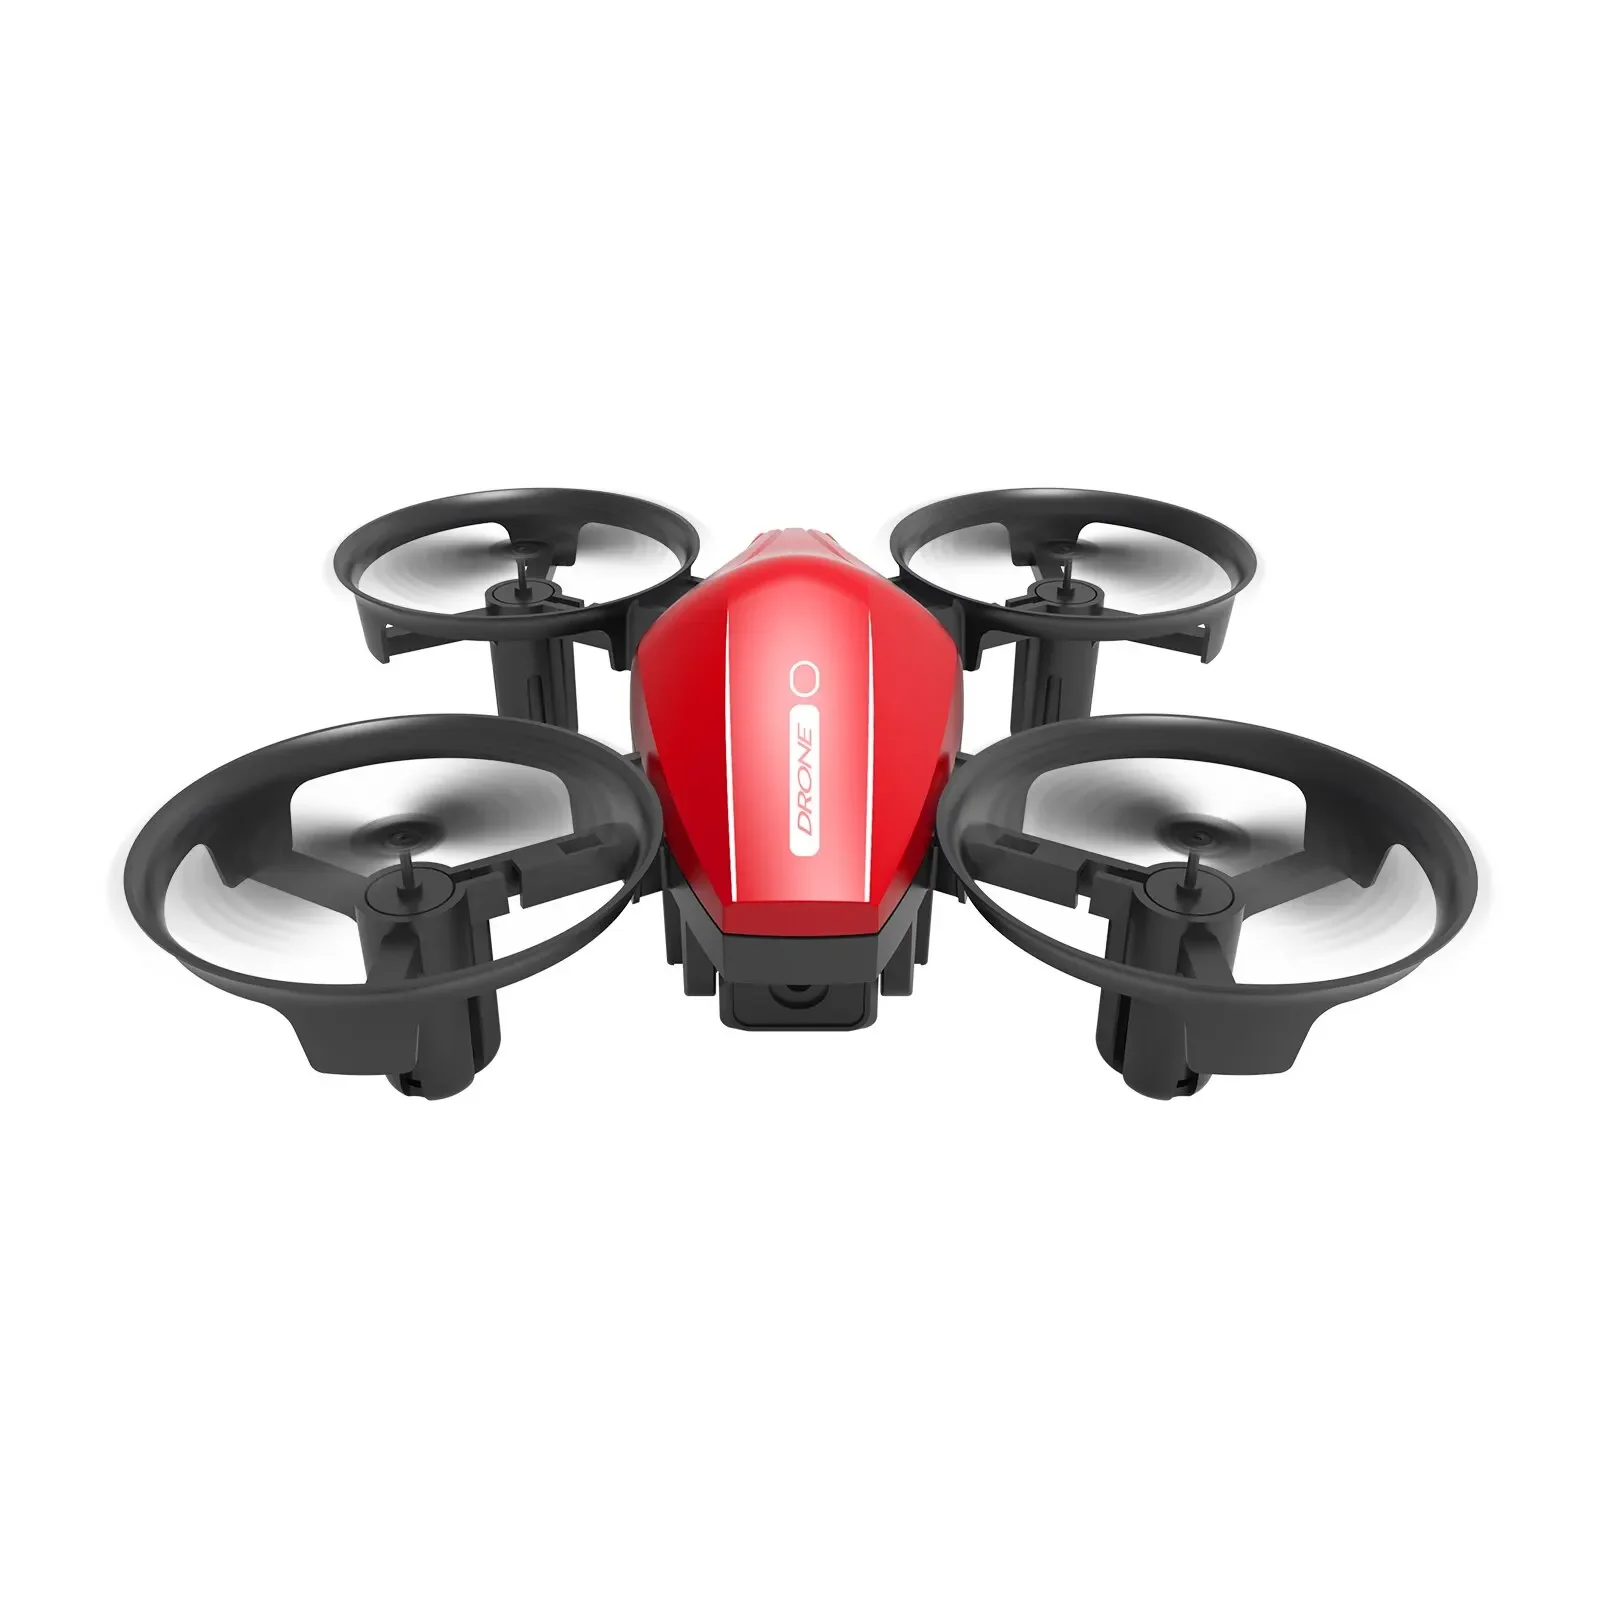 

Mini UAV Fall Resistant and Anti-collision 2.4G 4-channel 6-axis Quadcopter 360 ° Rotary Roll Remote Control Toy Gifts Drone